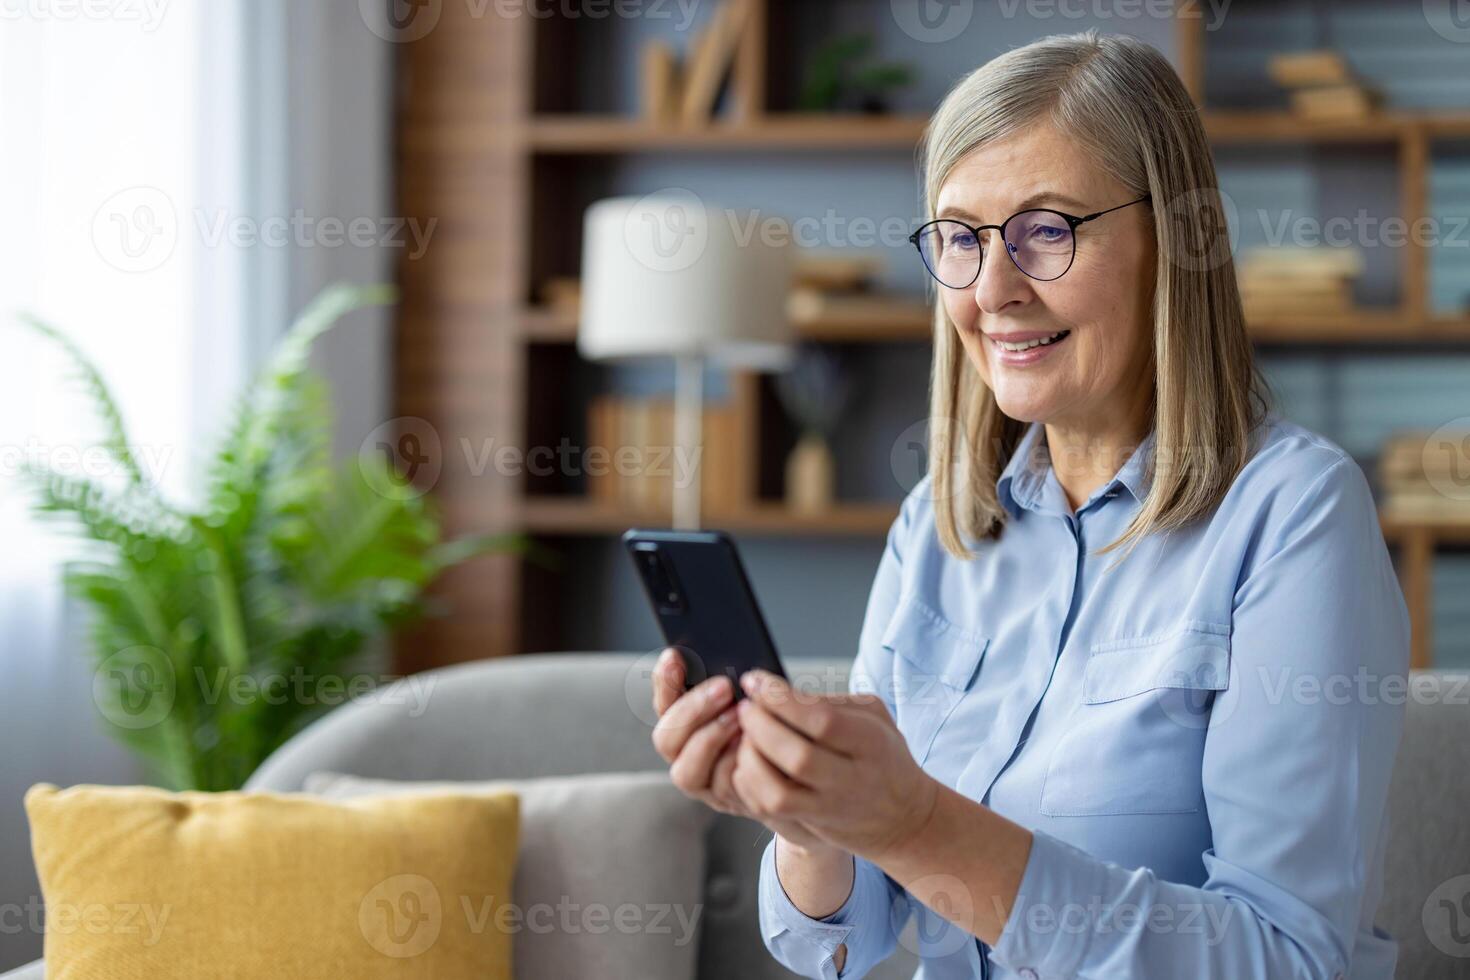 A middle-aged woman in a blue shirt sitting on a couch, absorbed in her smartphone in a well-lit, cozy living room setting. photo